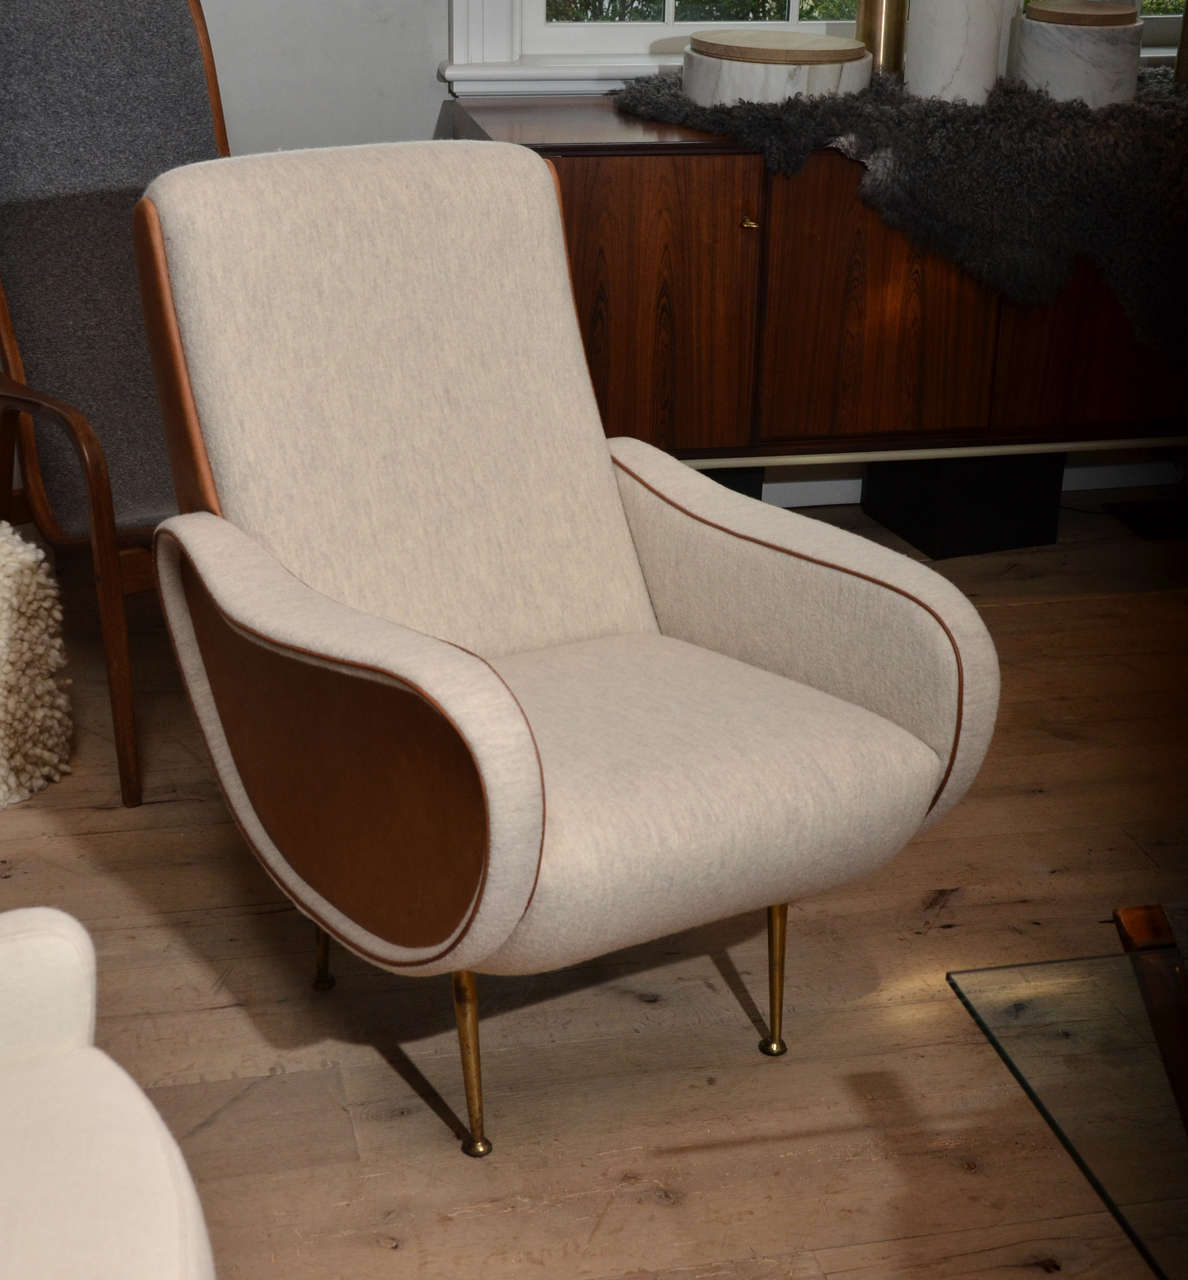 Stunning Mid-Century Italian Armchairs in the style of Marco Zanuso newly re-upholstered in a boiled wool with saddle calfskin leather Arm Detail and piping.